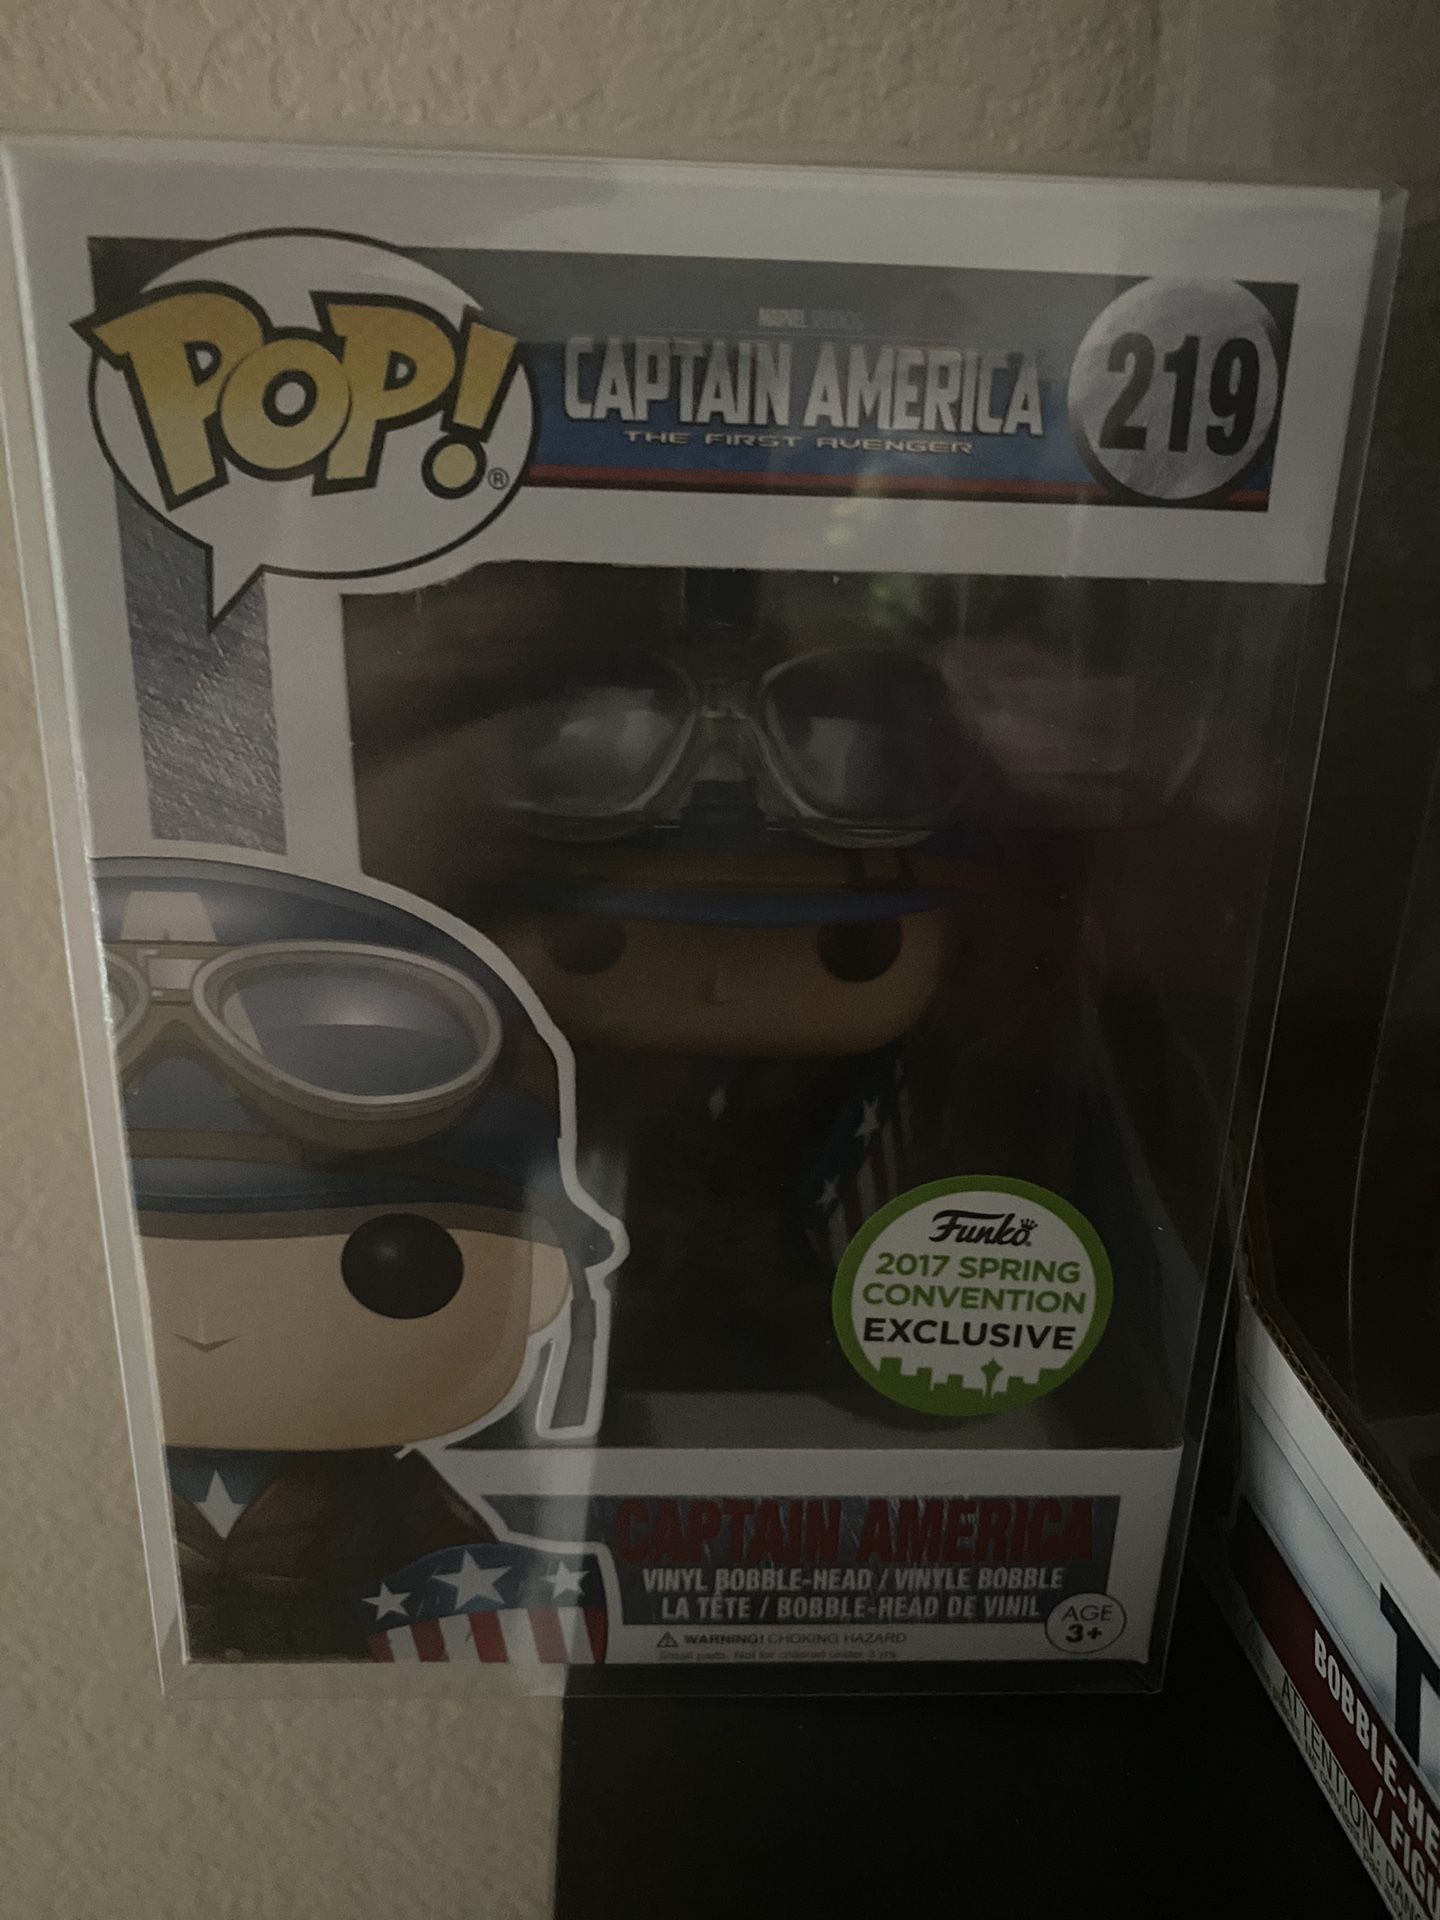 Captain America The First Avenger Captain America World War 2 WWII 2017 Spring Convention Shared Exclusive Funko Pop  